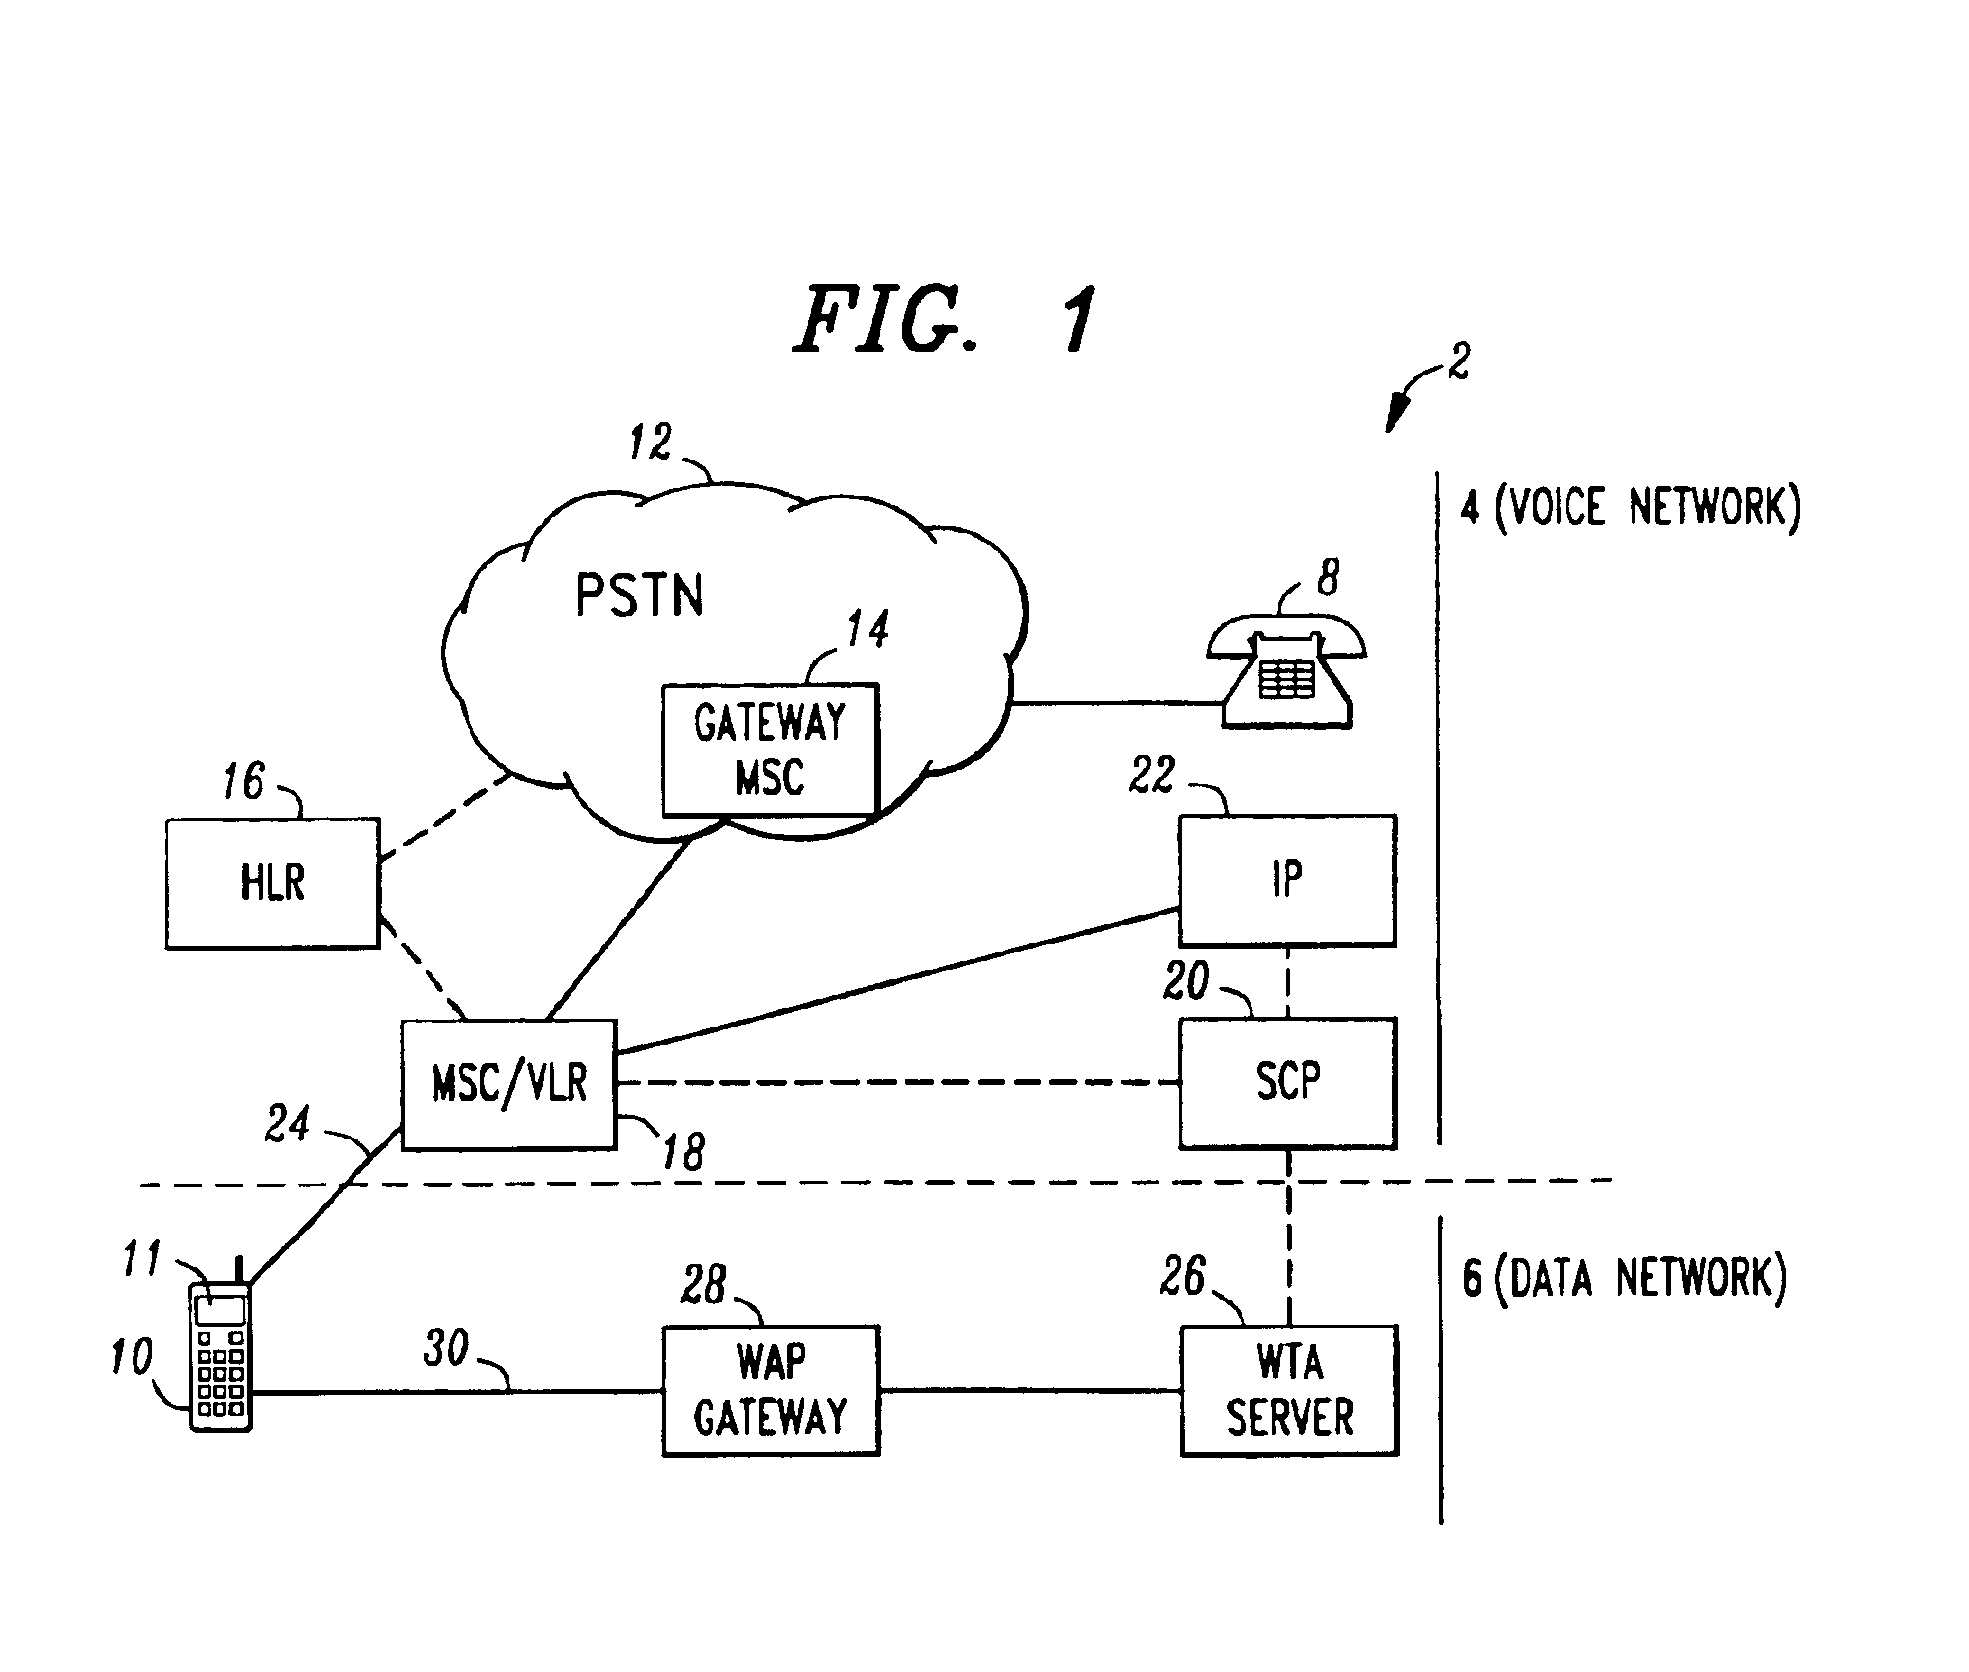 System and method for providing dynamic call disposition service to wireless terminals